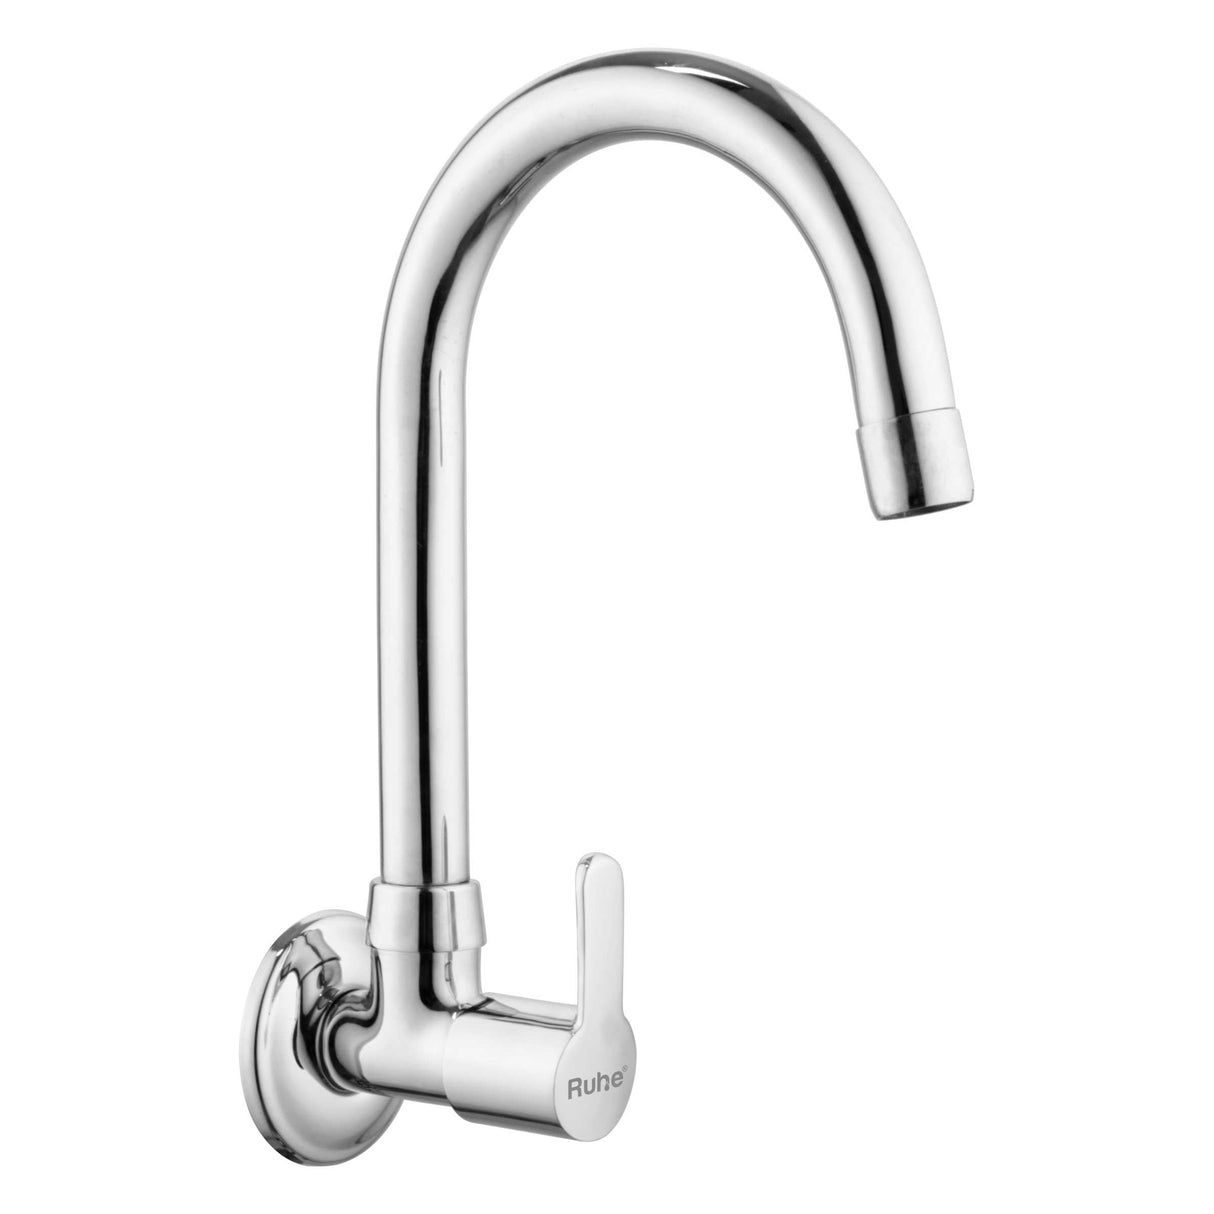 Rica Sink Tap with Medium (15 inches) Round Swivel Spout Brass Faucet